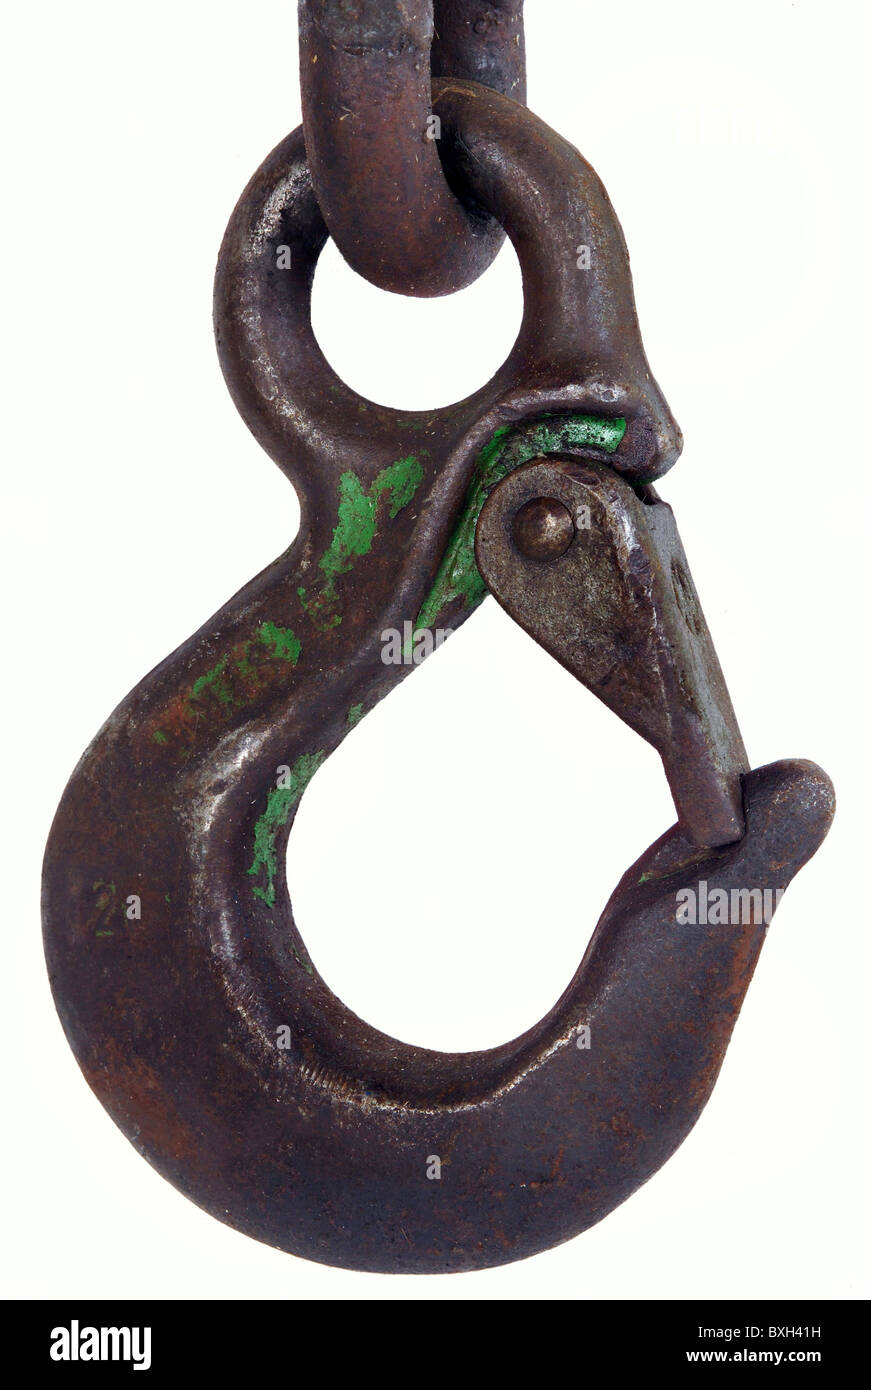 industry, tow hook, detail, Germany, 1950s, 50s, 20th century, historic, historical, chain, chains, tow rope, towrope, tow ropes, piton, snap hook, spring hook, karabiner, snap link, snap hooks, spring hooks, karabiners, snap links, load hook, load hooks, safety hook, iron, hanging, hang-up, hook, hooking, hooked, hooks, hooked, hook up, hooking up, hooked up, metal, chain link, chain links, hardware, clunky, rusty, rustier, rustiest, rust, clipping, cut out, cut-out, cut-outs, Additional-Rights-Clearences-Not Available Stock Photo